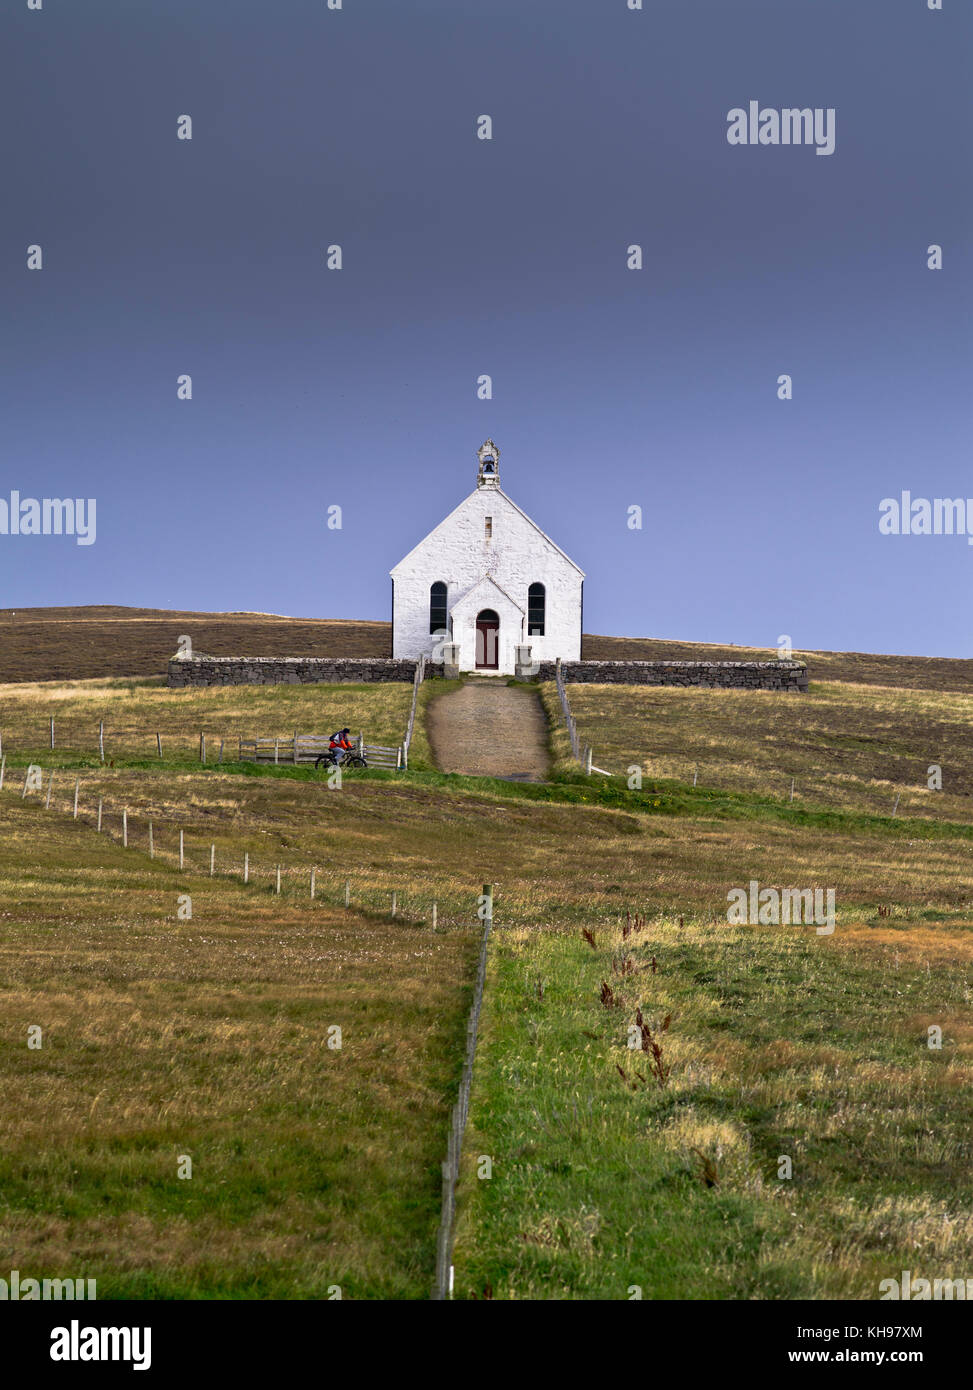 dh  KIRK FAIR ISLE Church of Scotland remote building stormy skies cyclist riding bike bicycle Stock Photo